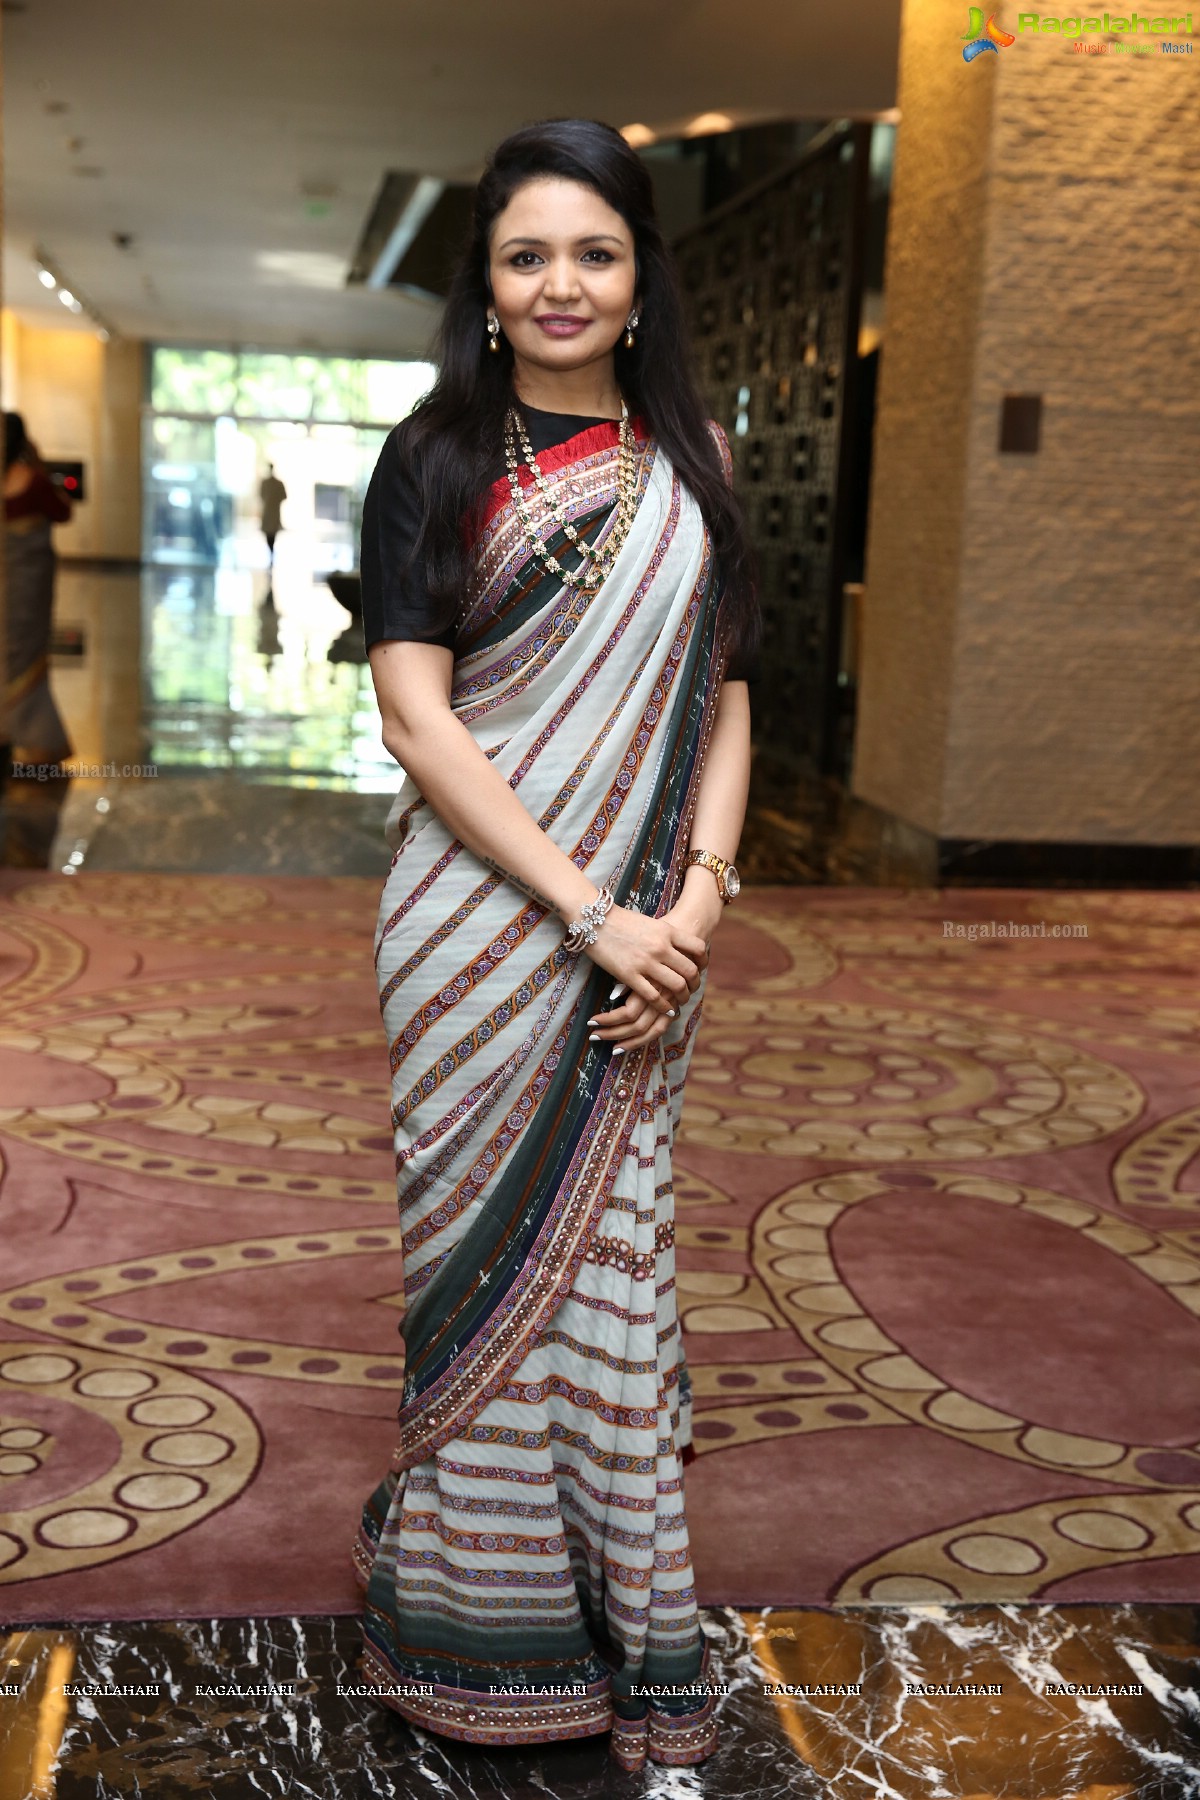 New Teams of FLO & YFLO Takes Over at Park Hyatt, Hyderabad. Tabu graces the Change of Guard